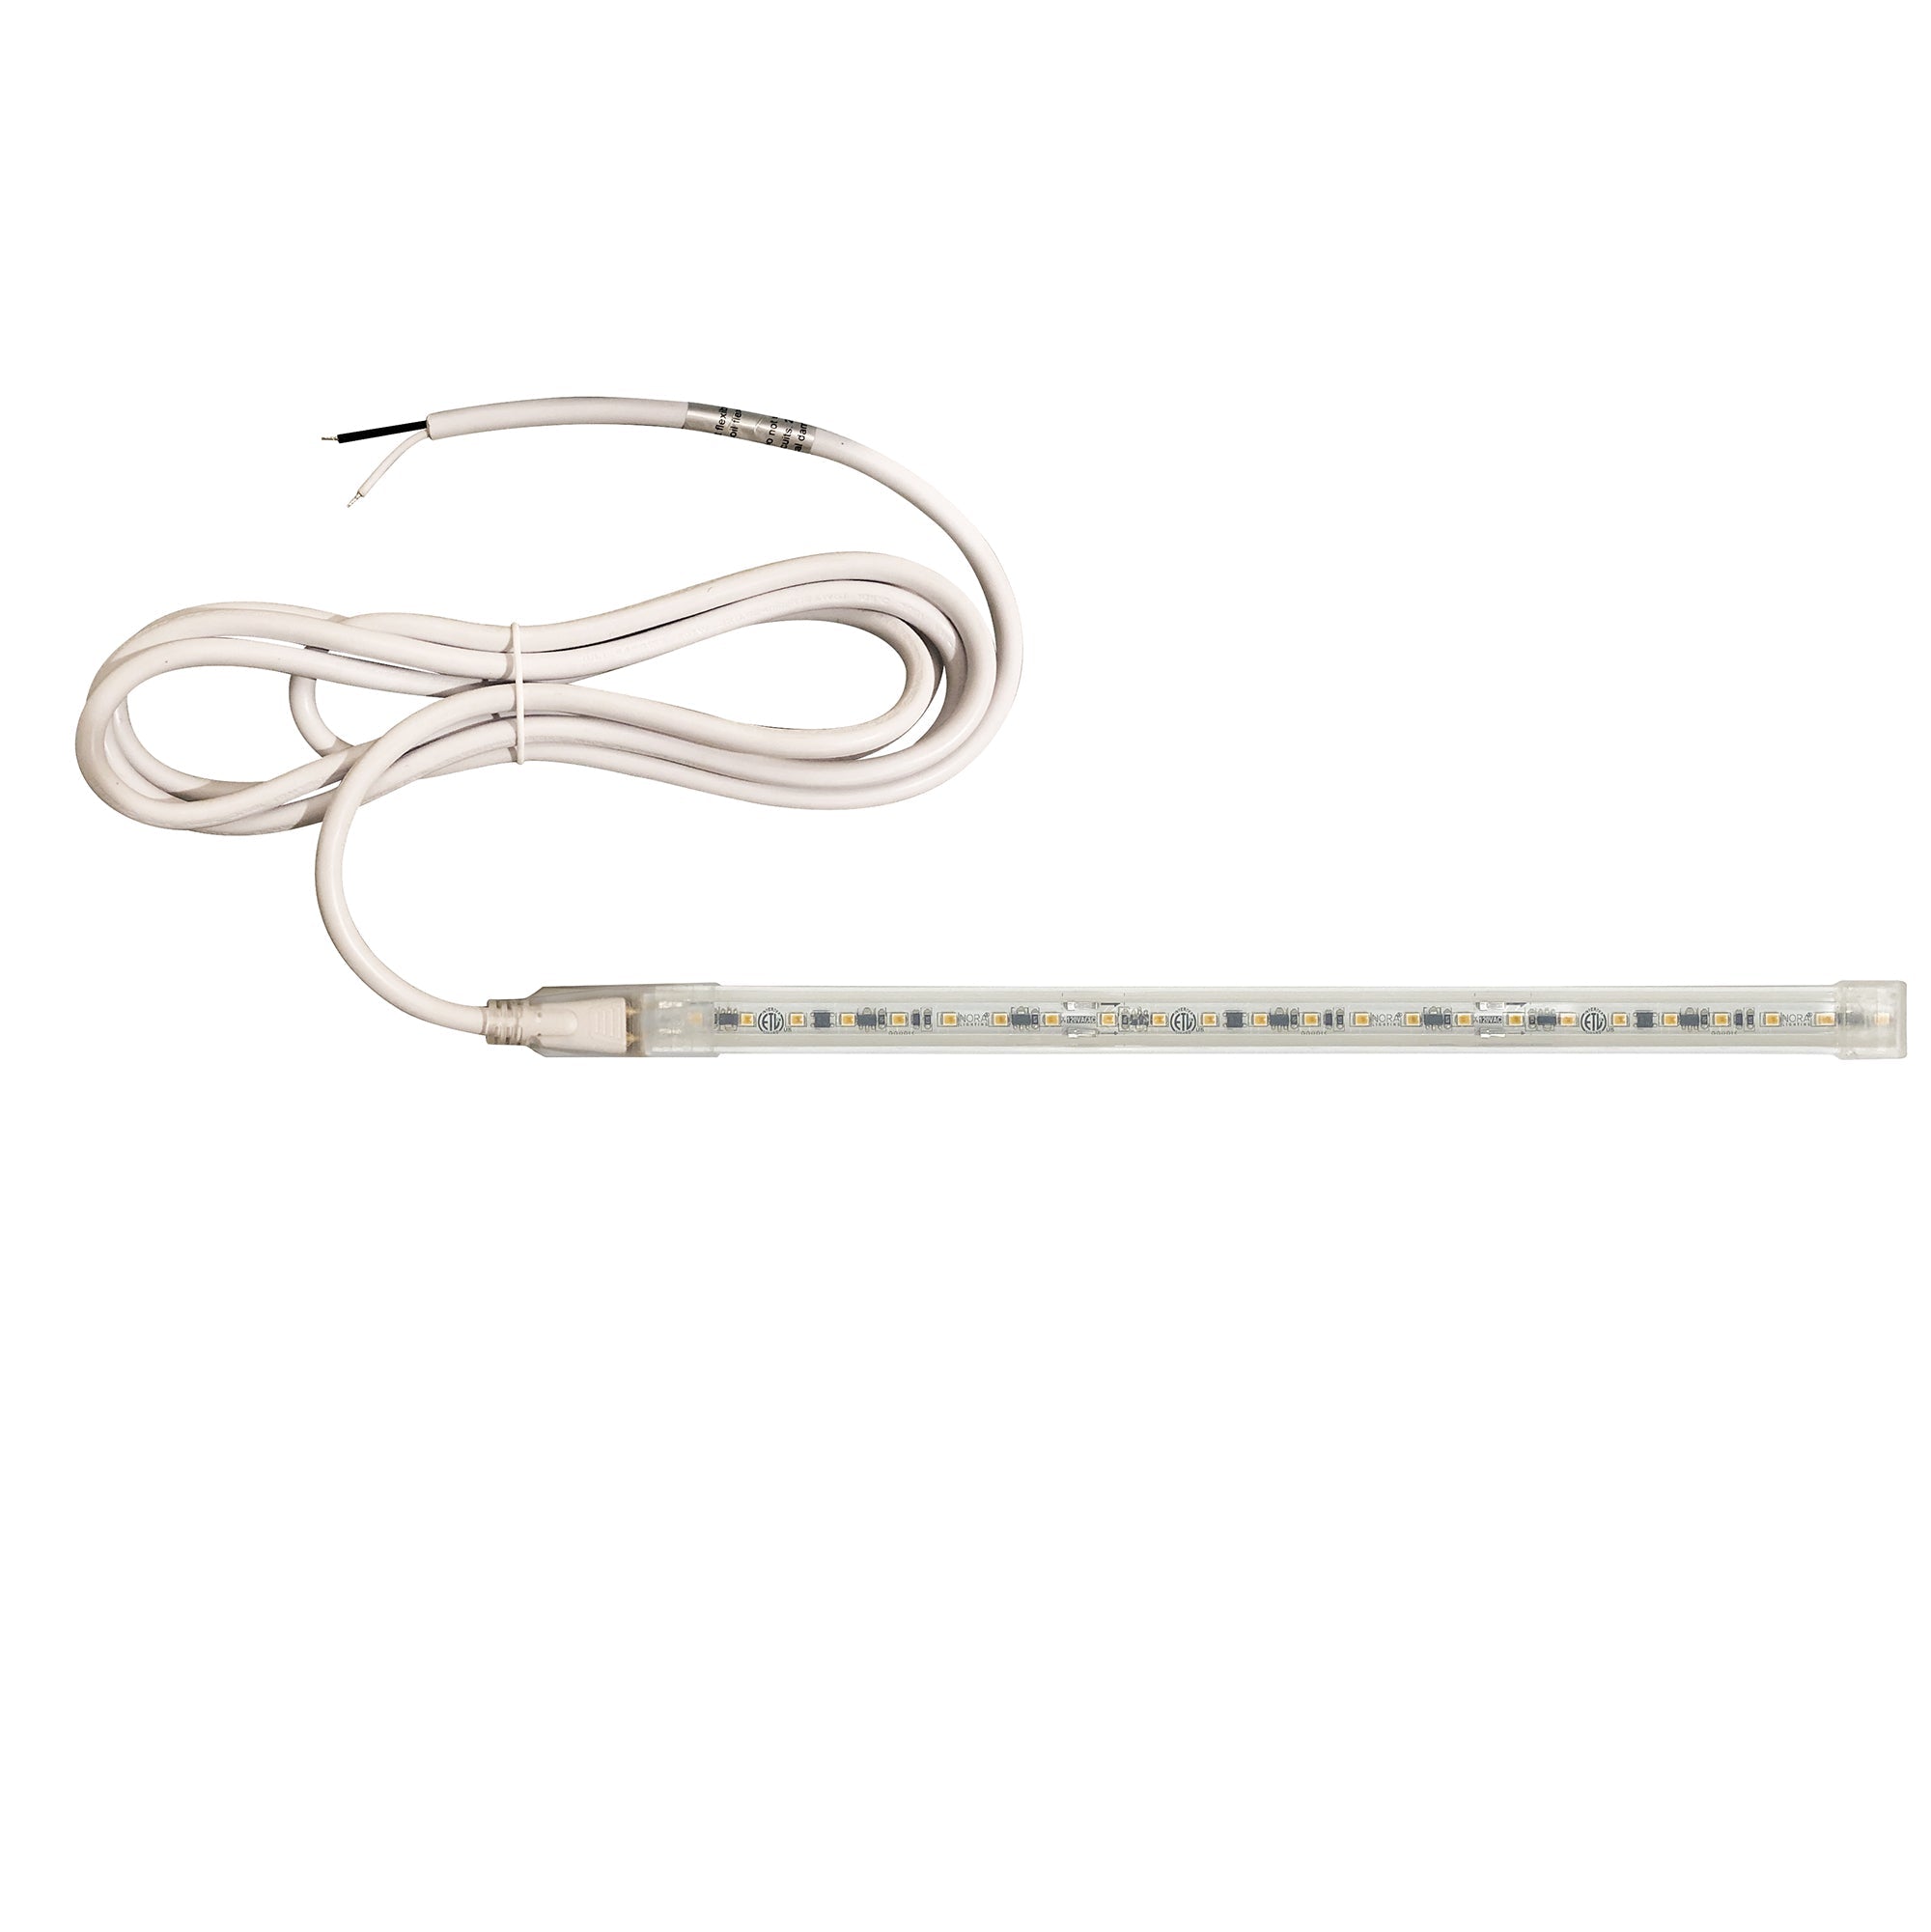 Nora Lighting NUTP13-W8-4-12-930/HW - Accent / Undercabinet - Custom Cut 8-ft, 4-in 120V Continuous LED Tape Light, 330lm / 3.6W per foot, 3000K, w/ Mounting Clips and 8' Hardwired Power Cord